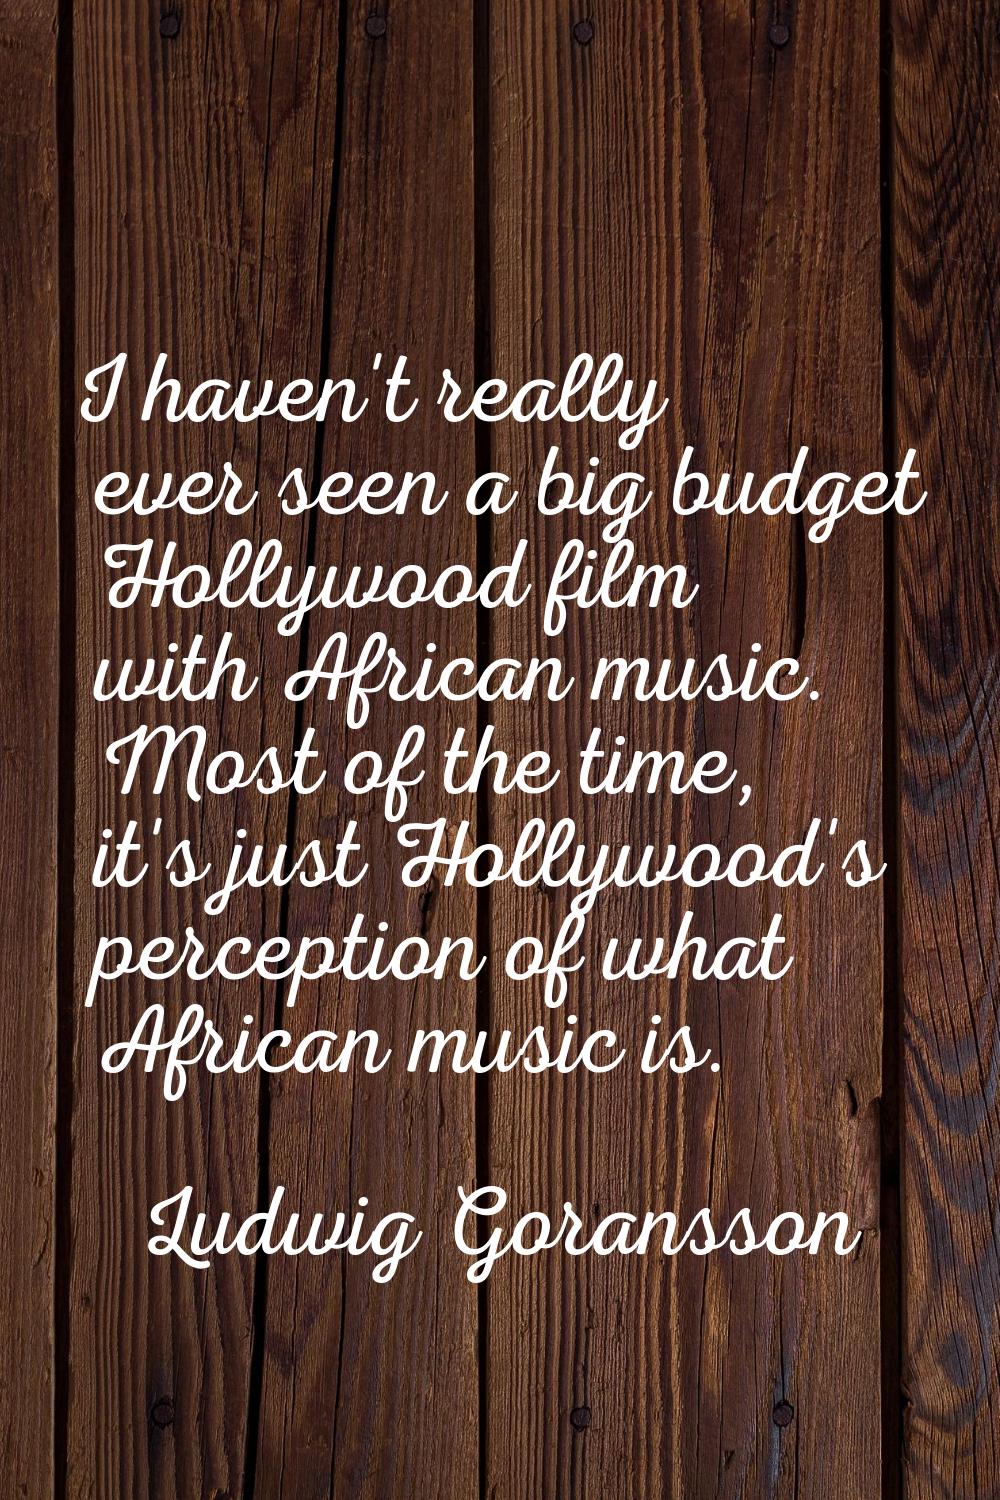 I haven't really ever seen a big budget Hollywood film with African music. Most of the time, it's j